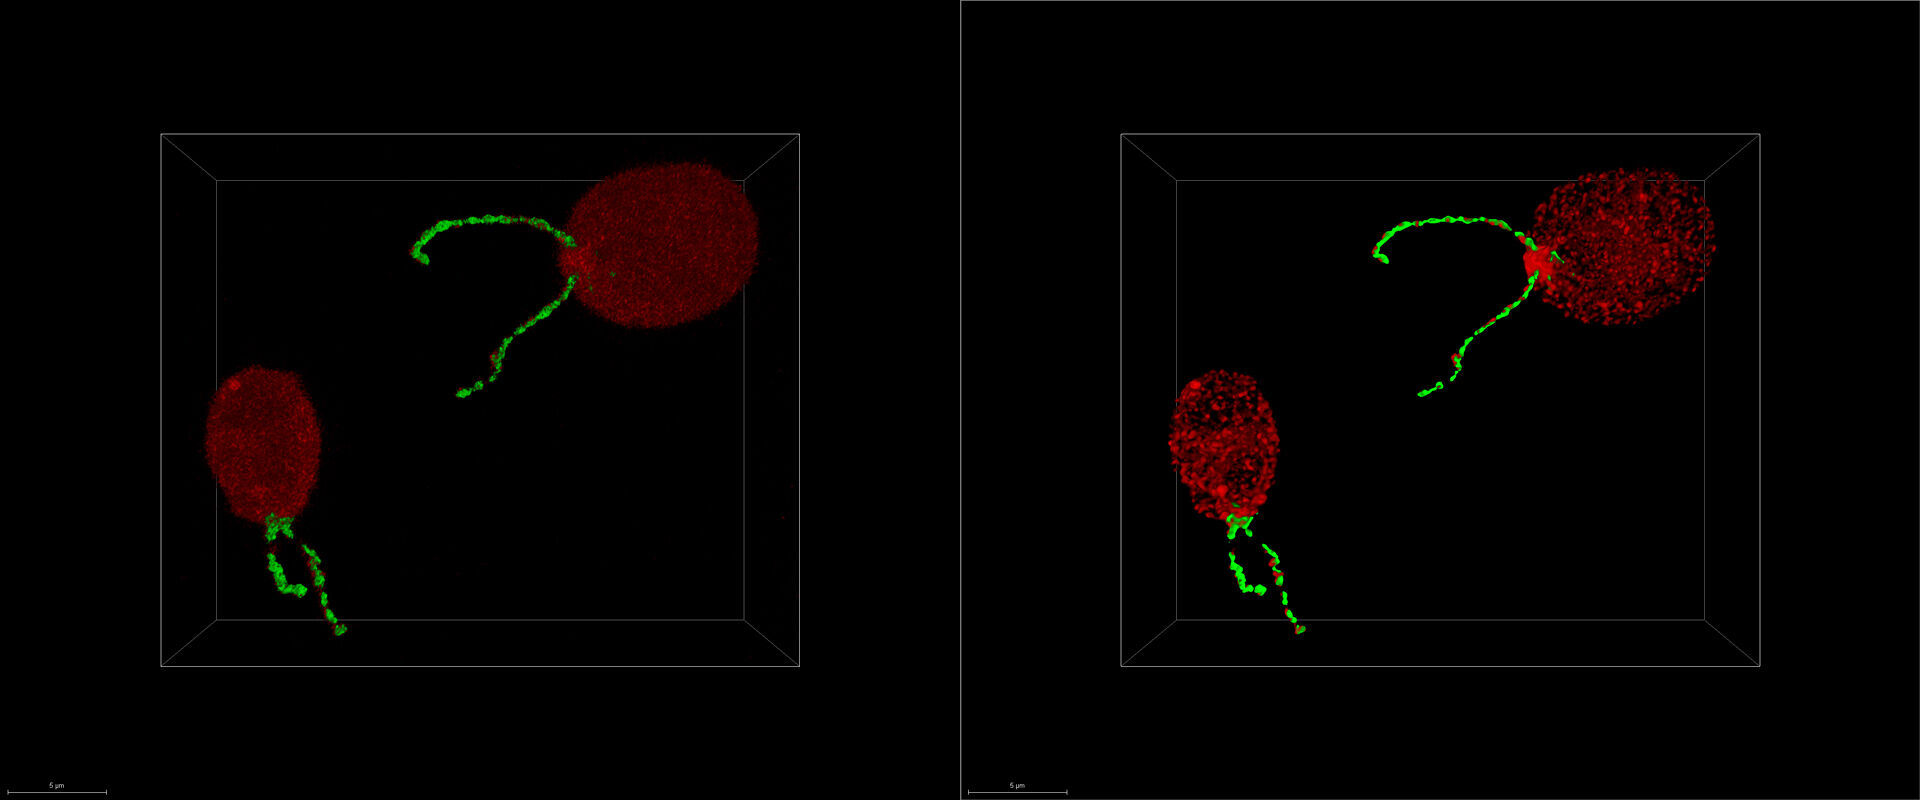 Chlamydomonas reinhardtii, two different types of intraflagellar transport proteins, IFT-NeonGreen and IFT-mCherry. Samples kindly provided by the Pigino-Lab, Max-Planck Institute of Molecular Cell Biology and Genetics, Dresden, Germany.